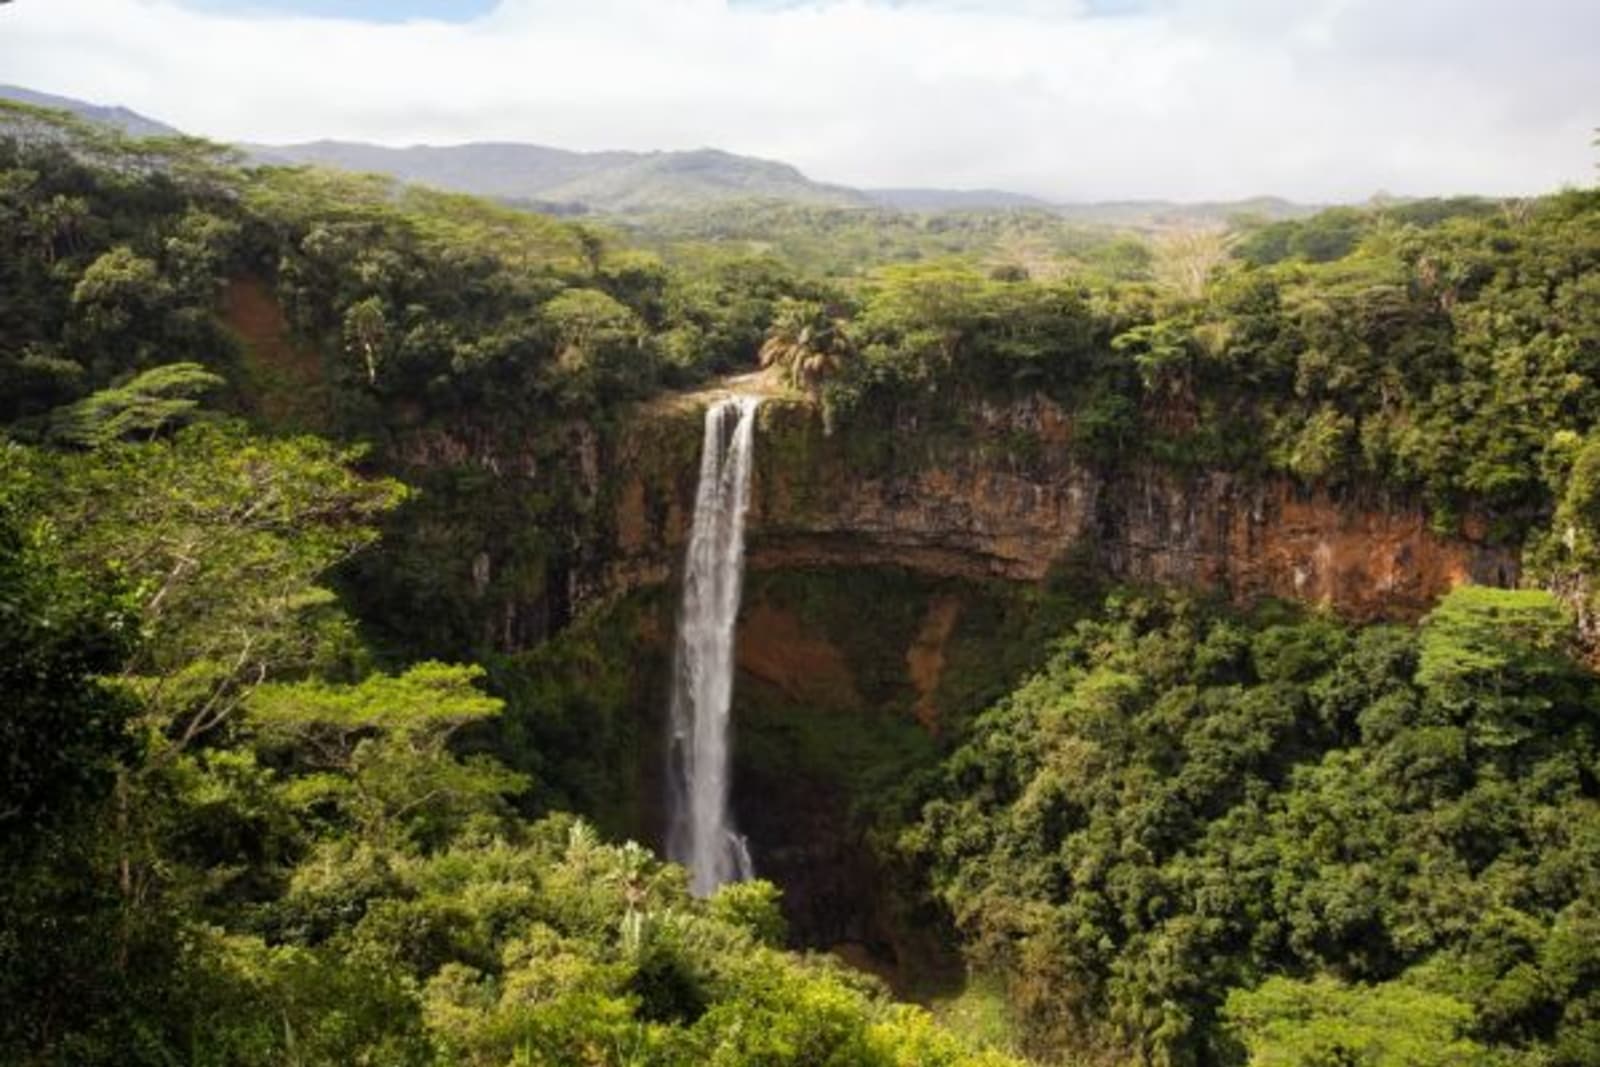 Distant shot of water falling from a large waterfall in Mauritius